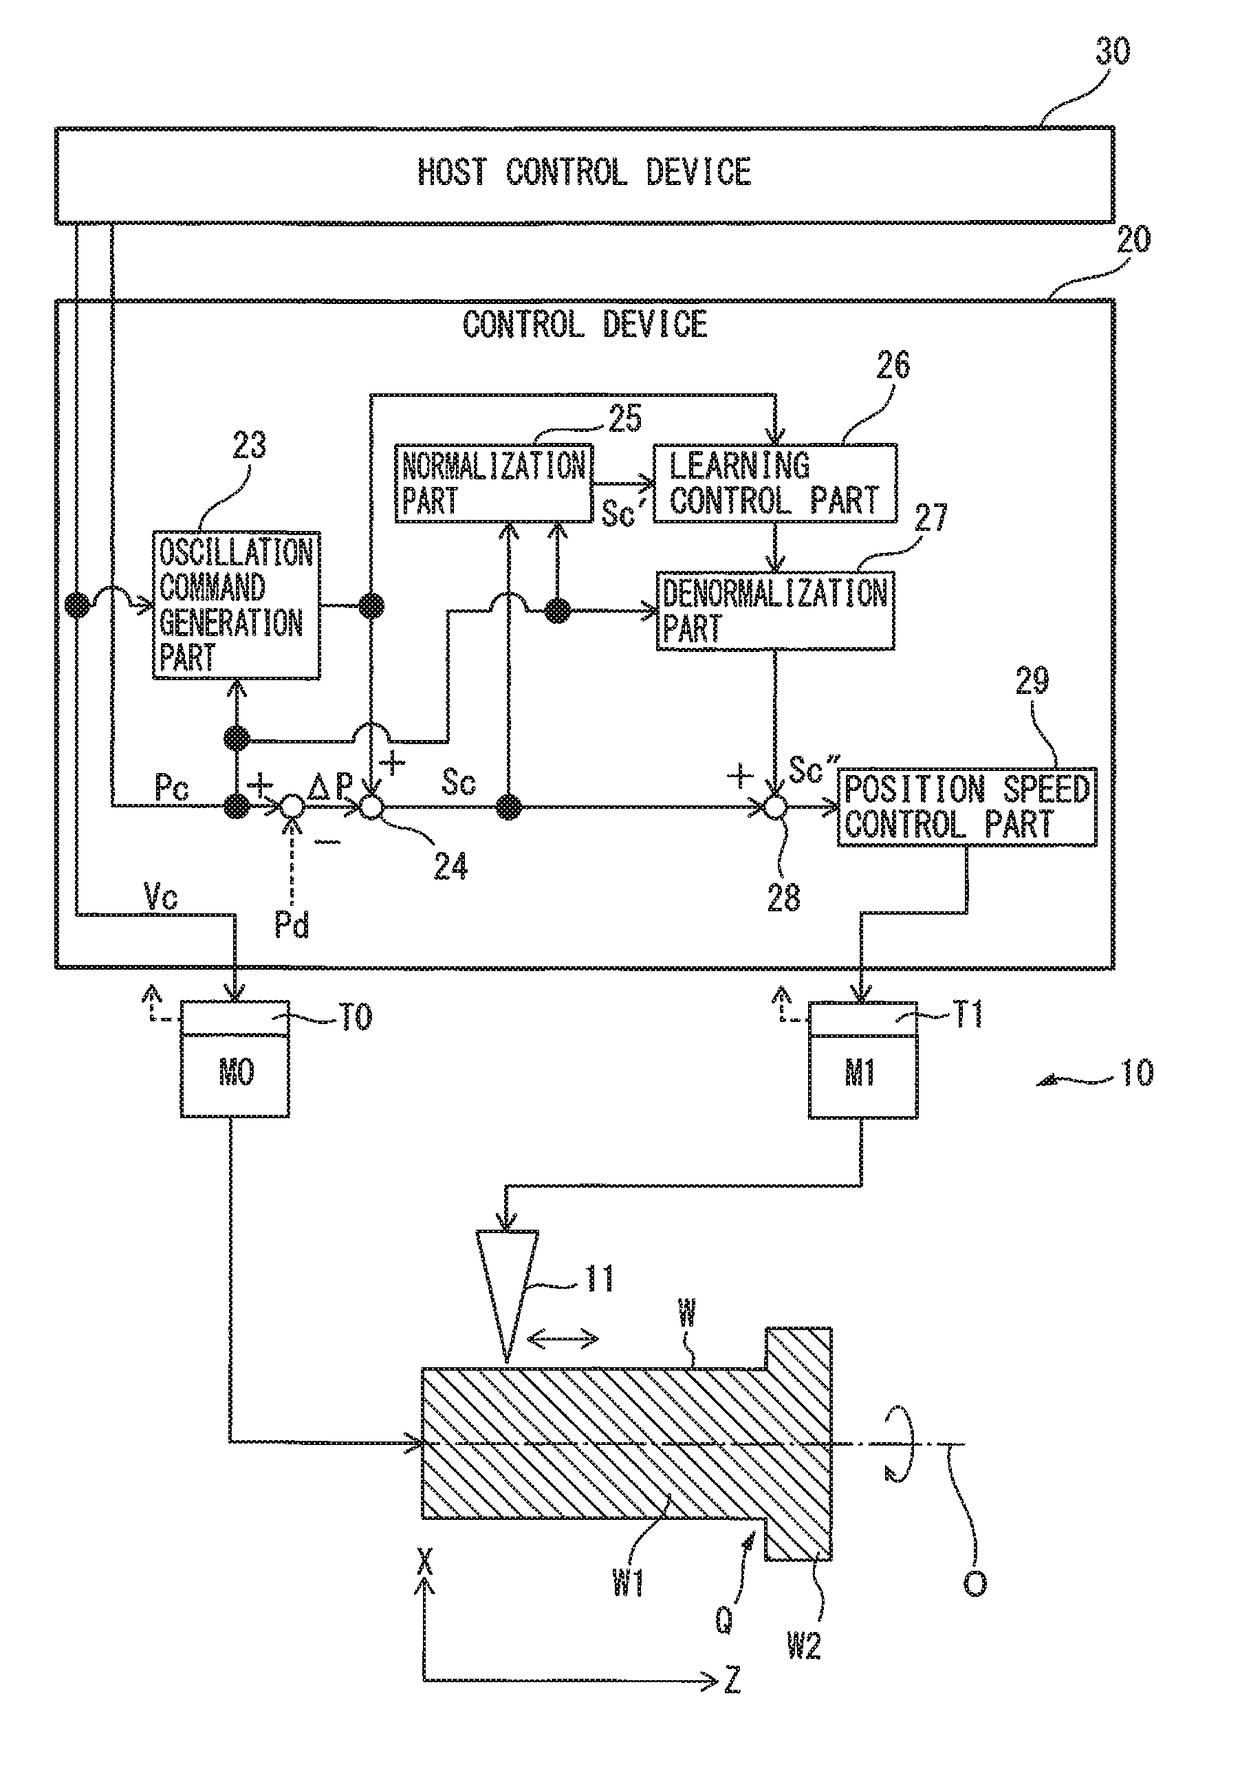 Control device for machine tool performing oscillation cutting